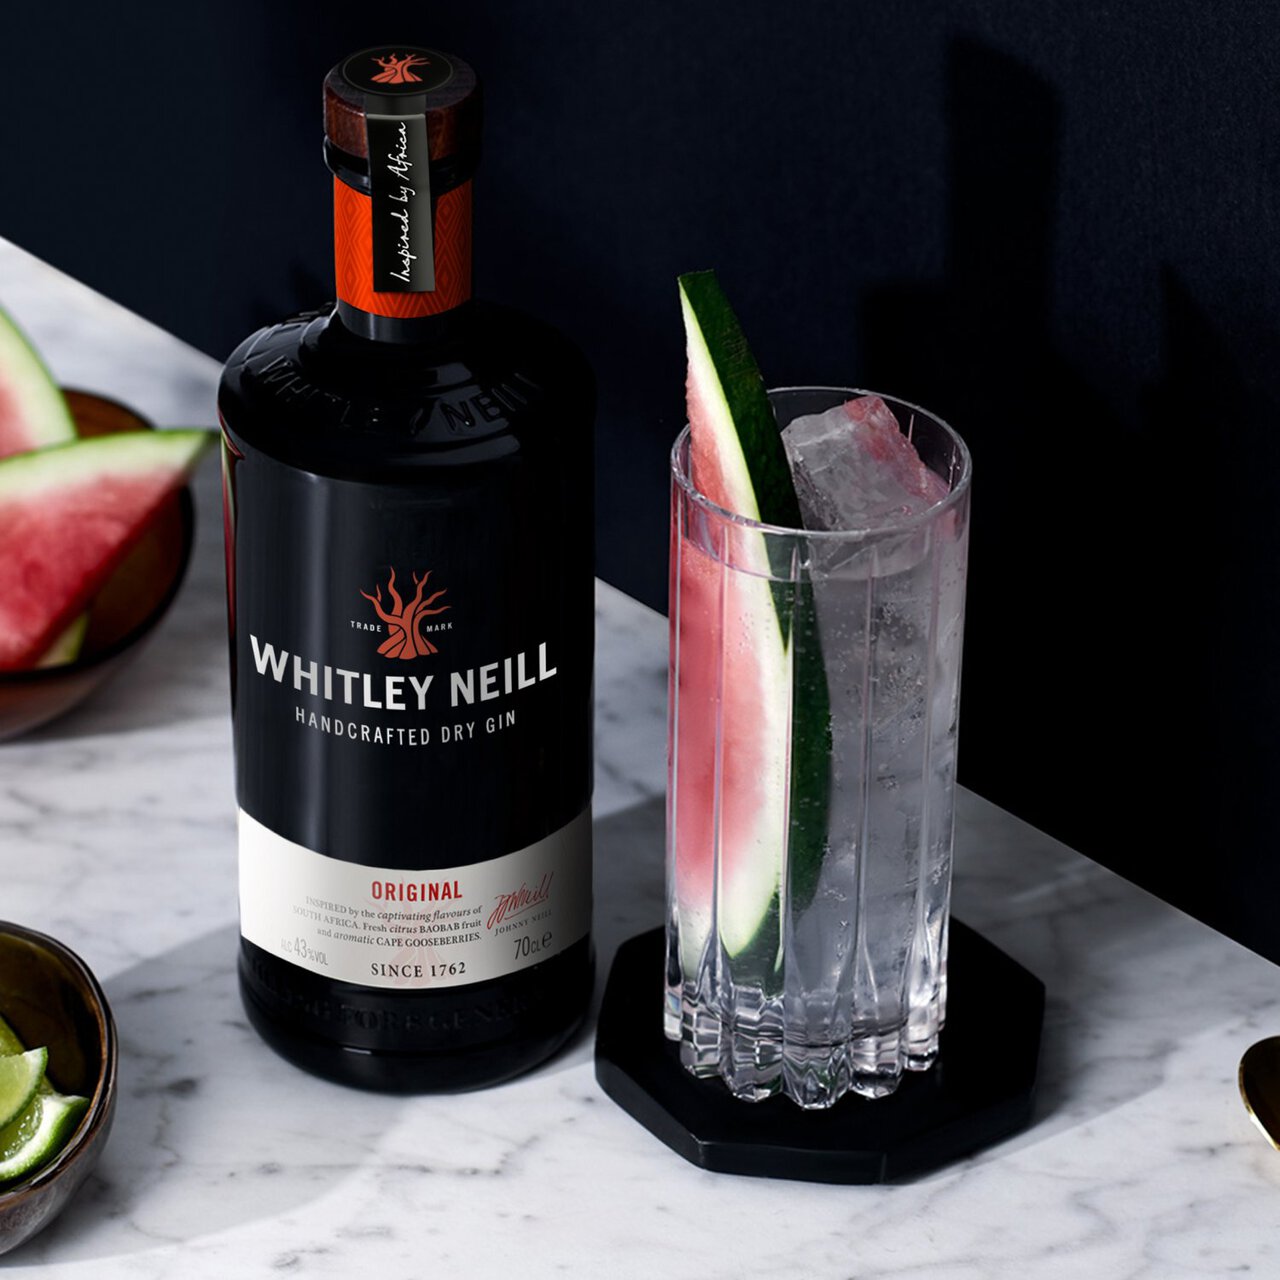 Whitley Neill Dry Gin 70cl